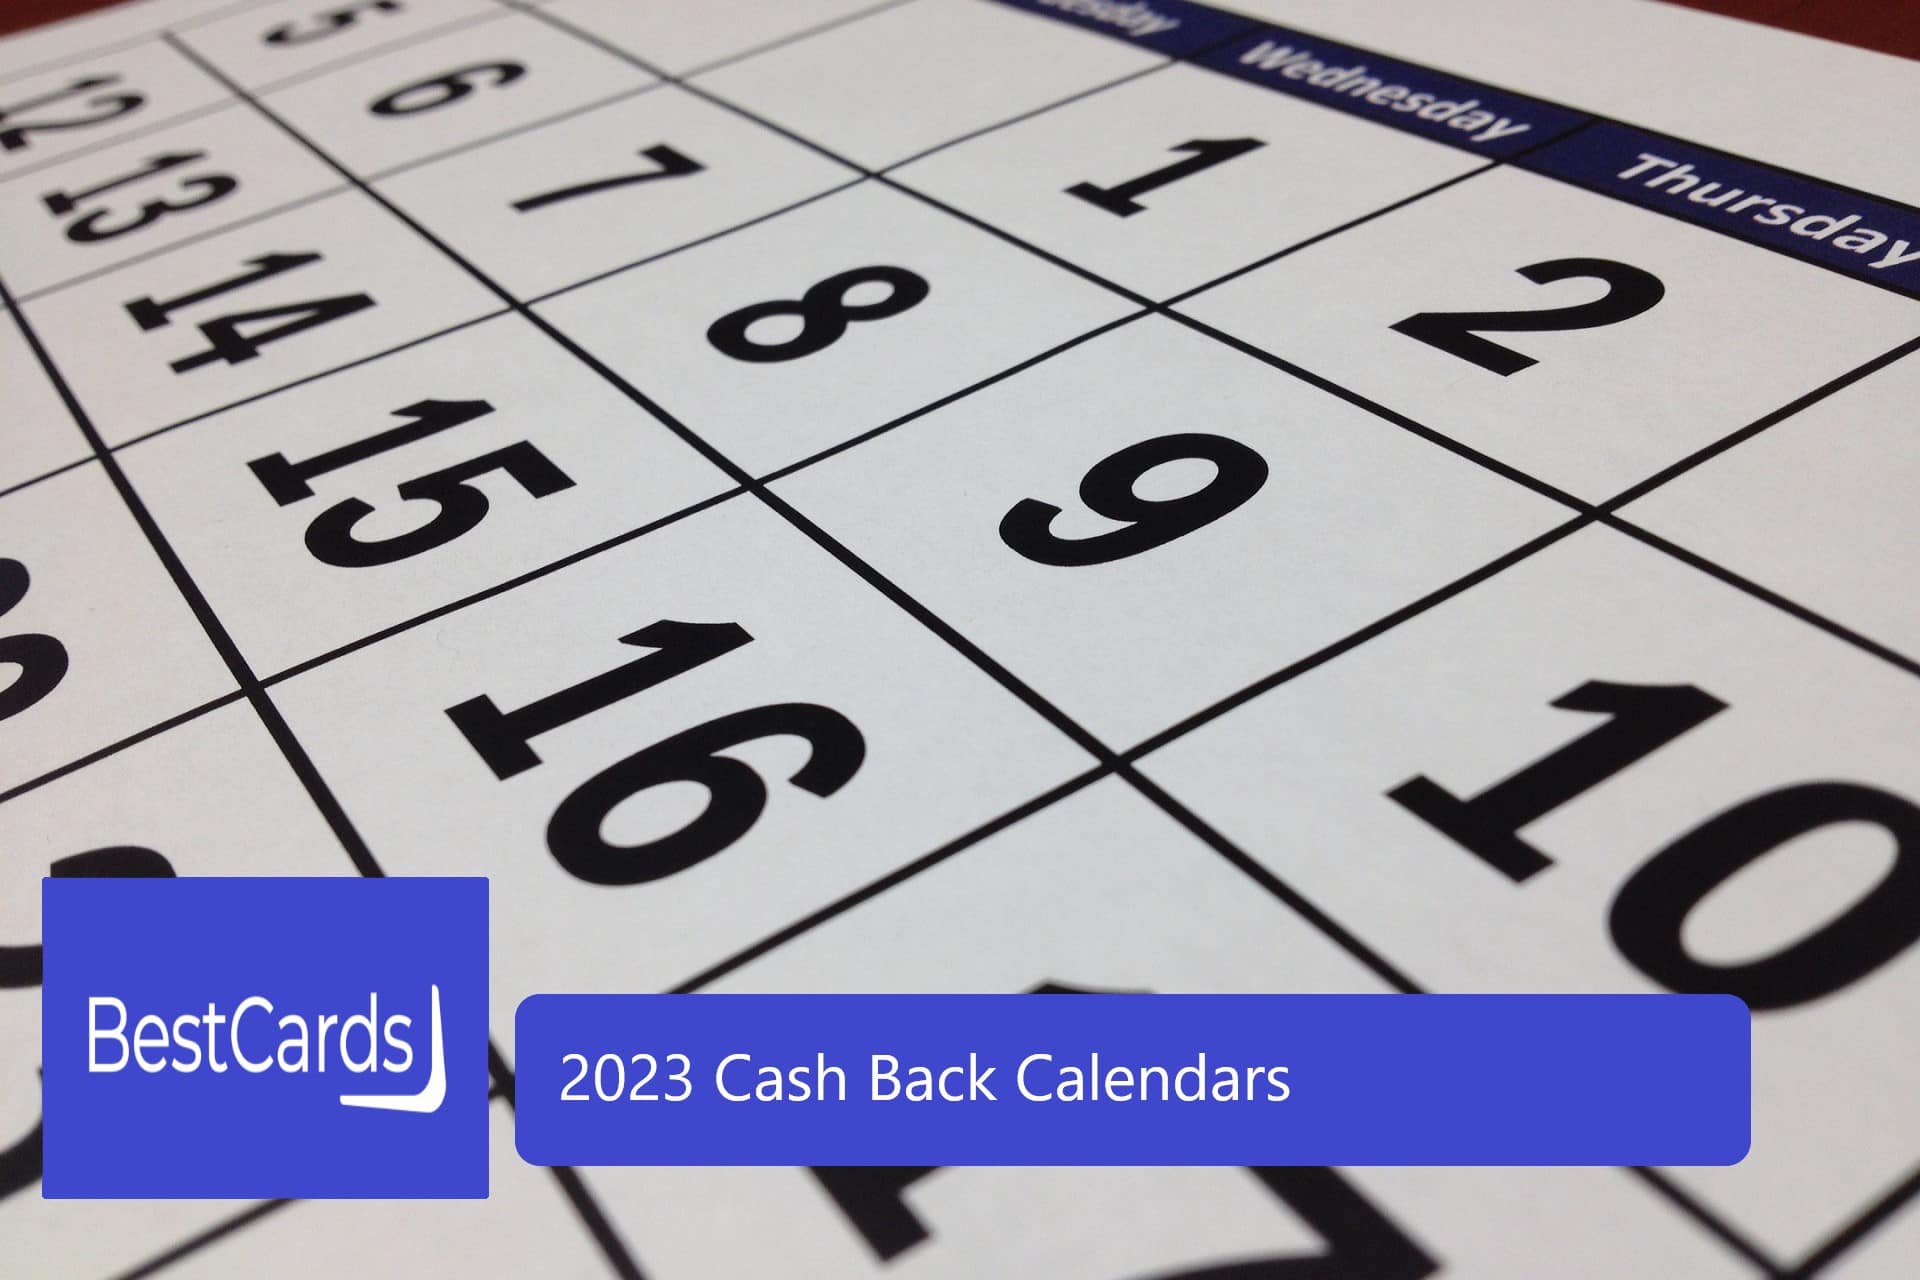 5% cash back bonus calendars for chase and discover